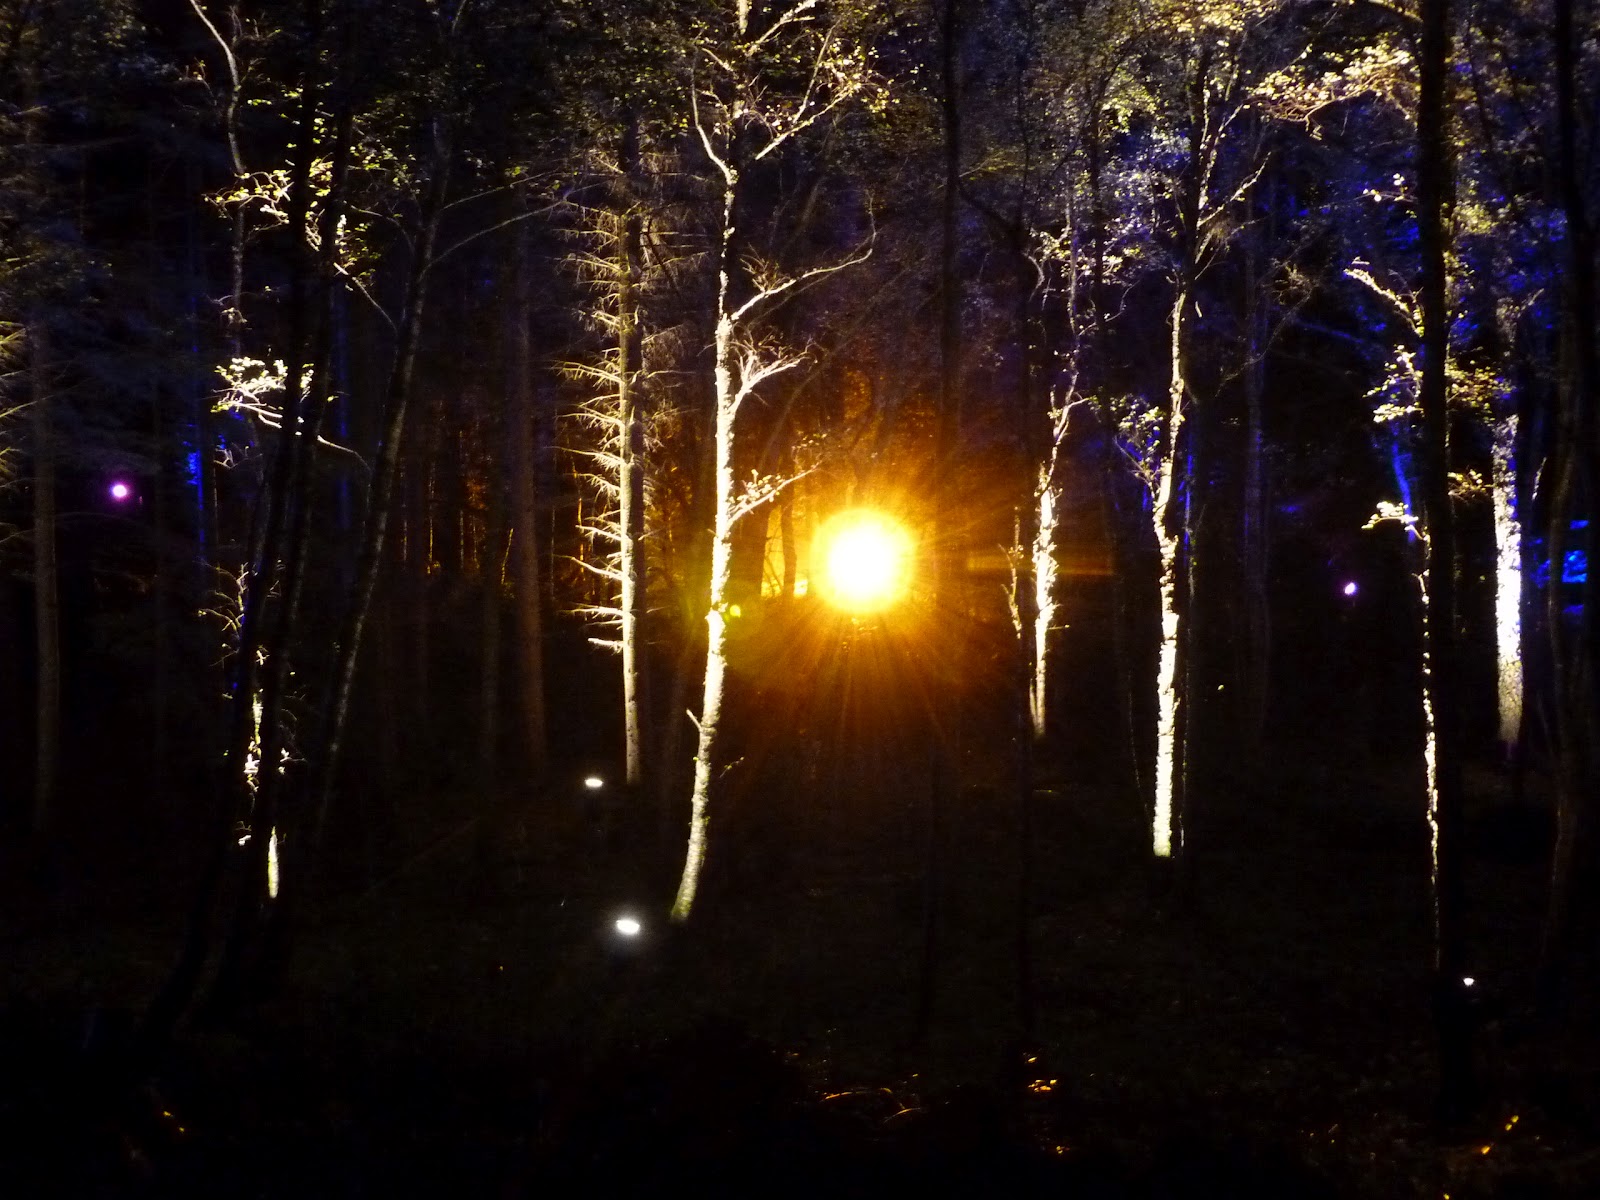 Enchanted Forest, Faskally, Pitlochry